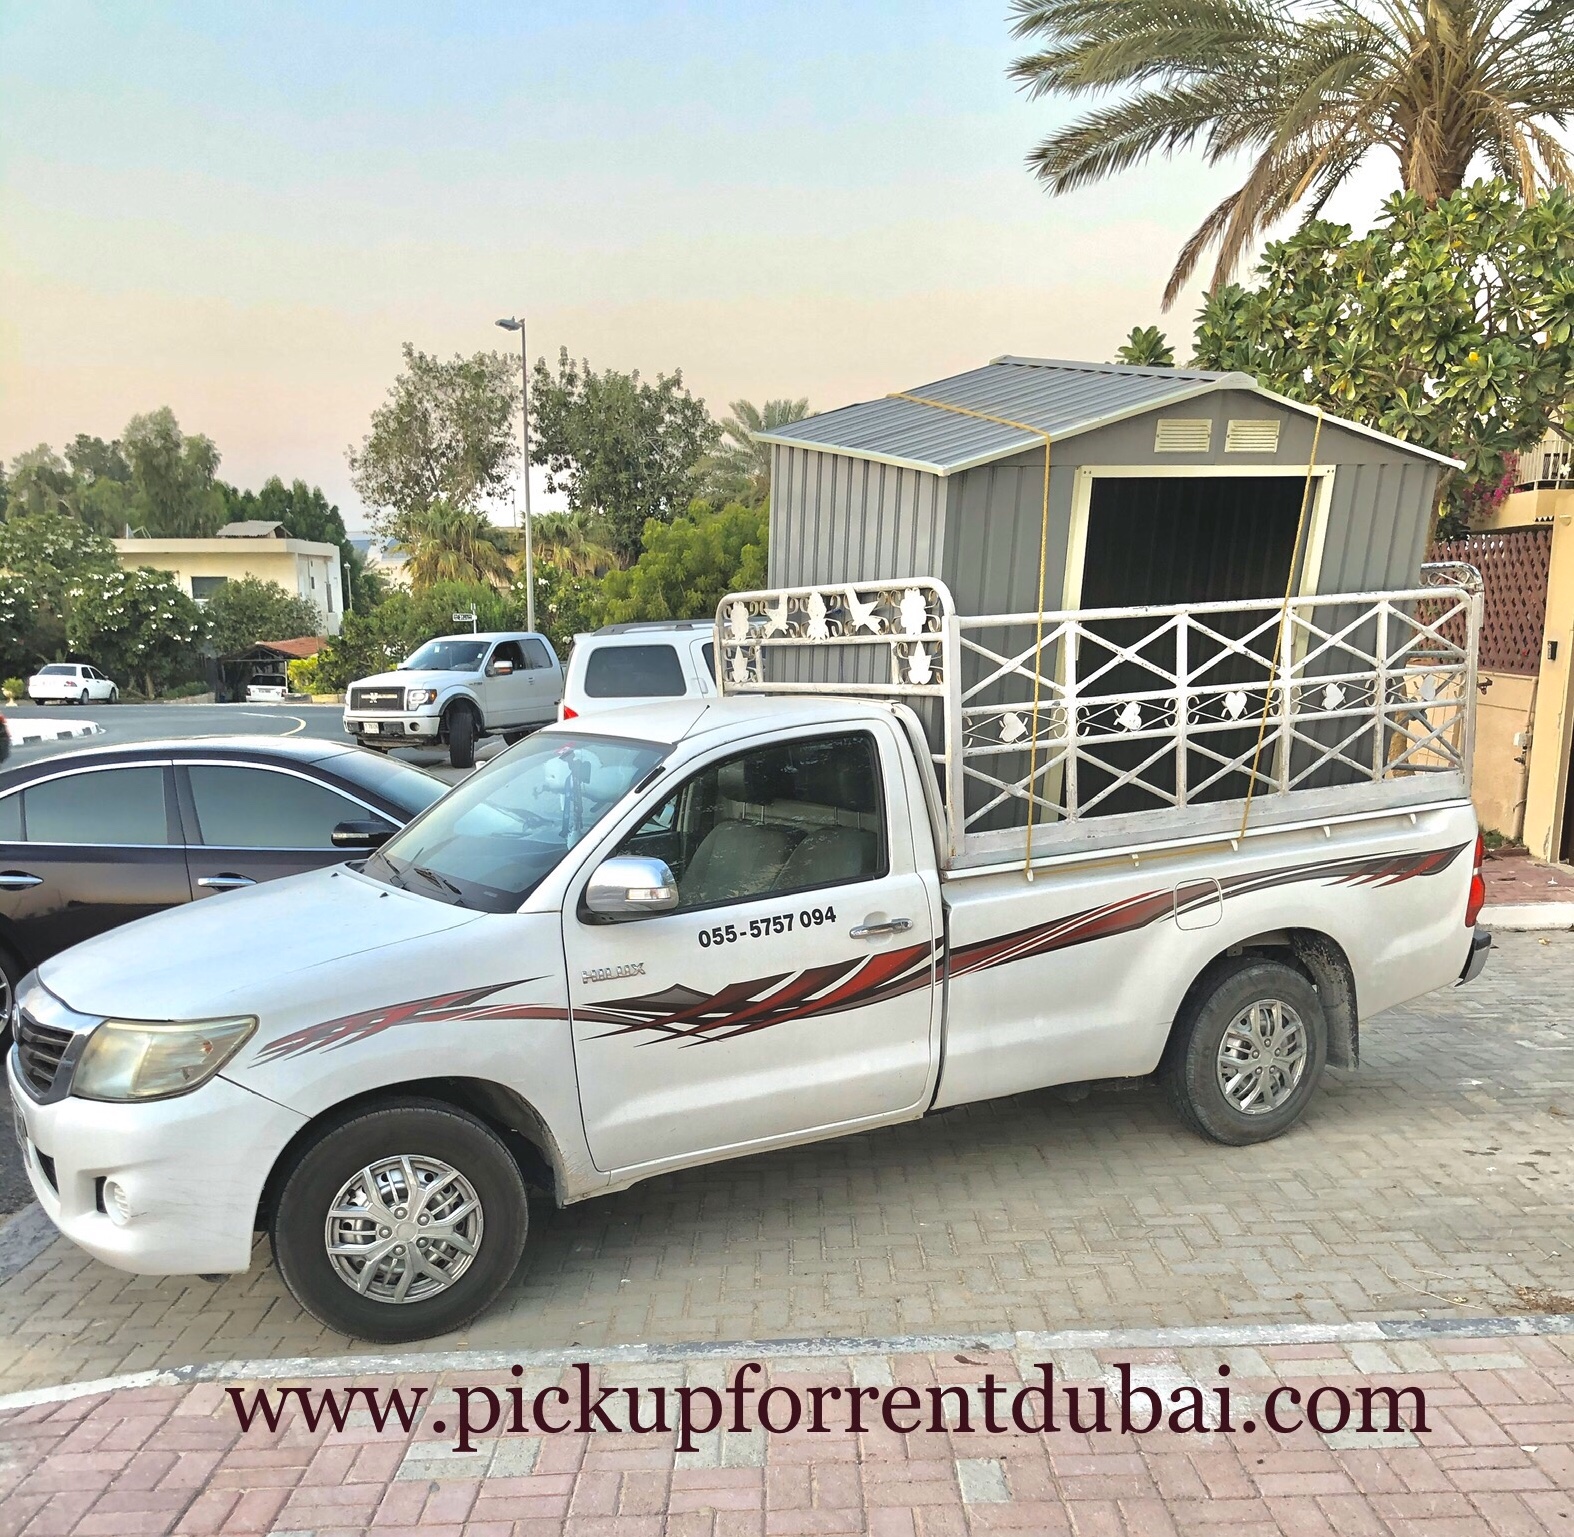 Pickup For Rent in Abu Dhabi 055-5757094